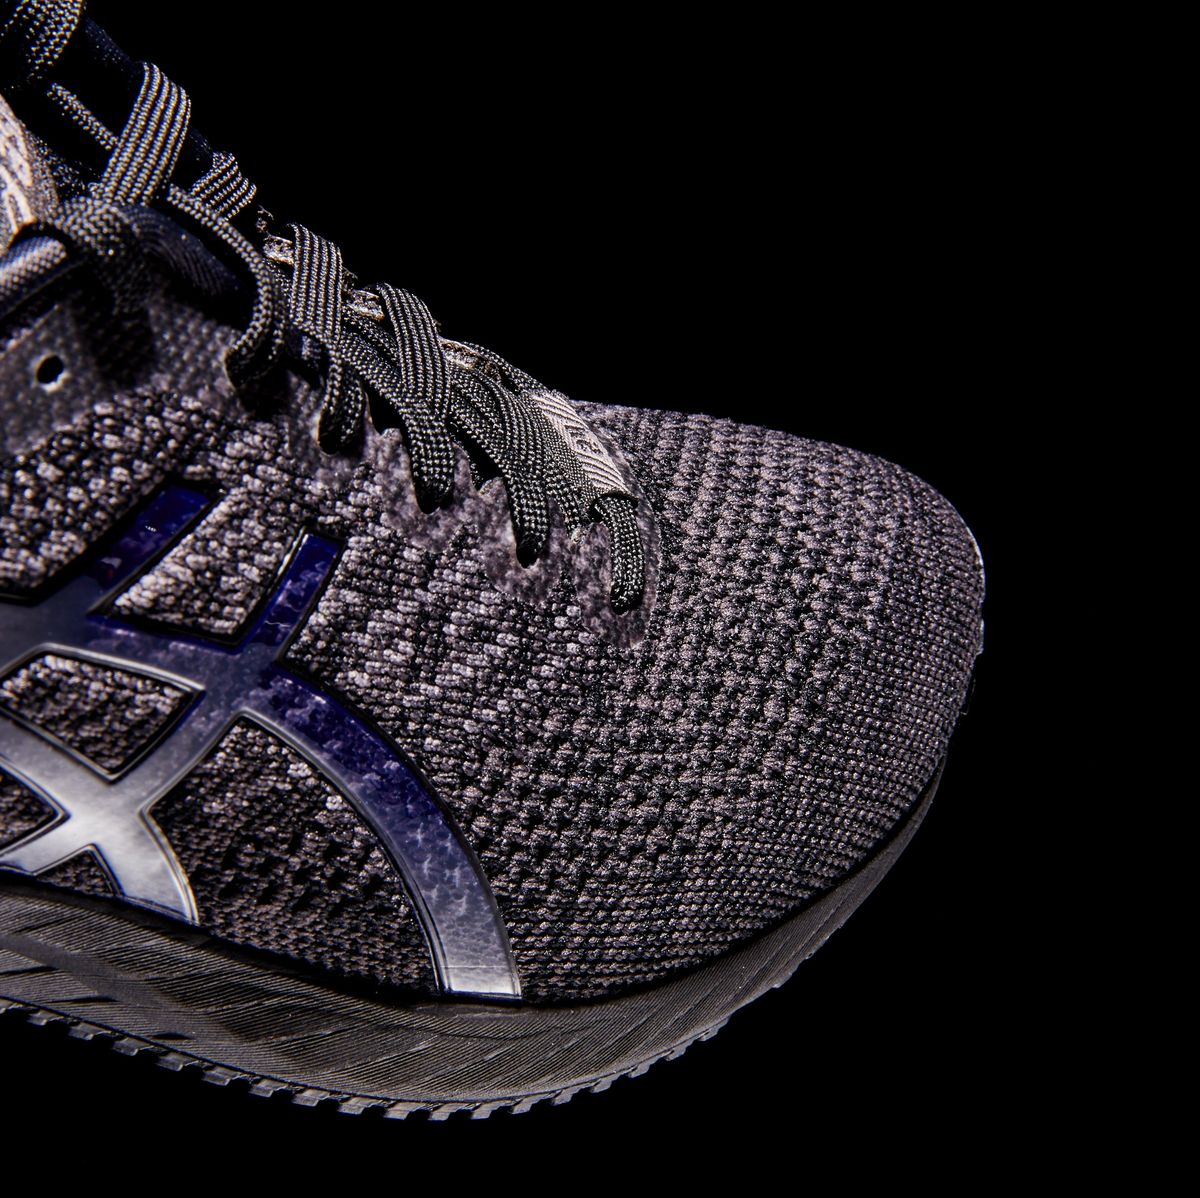 Trainer 24 Review - Asics Road Review